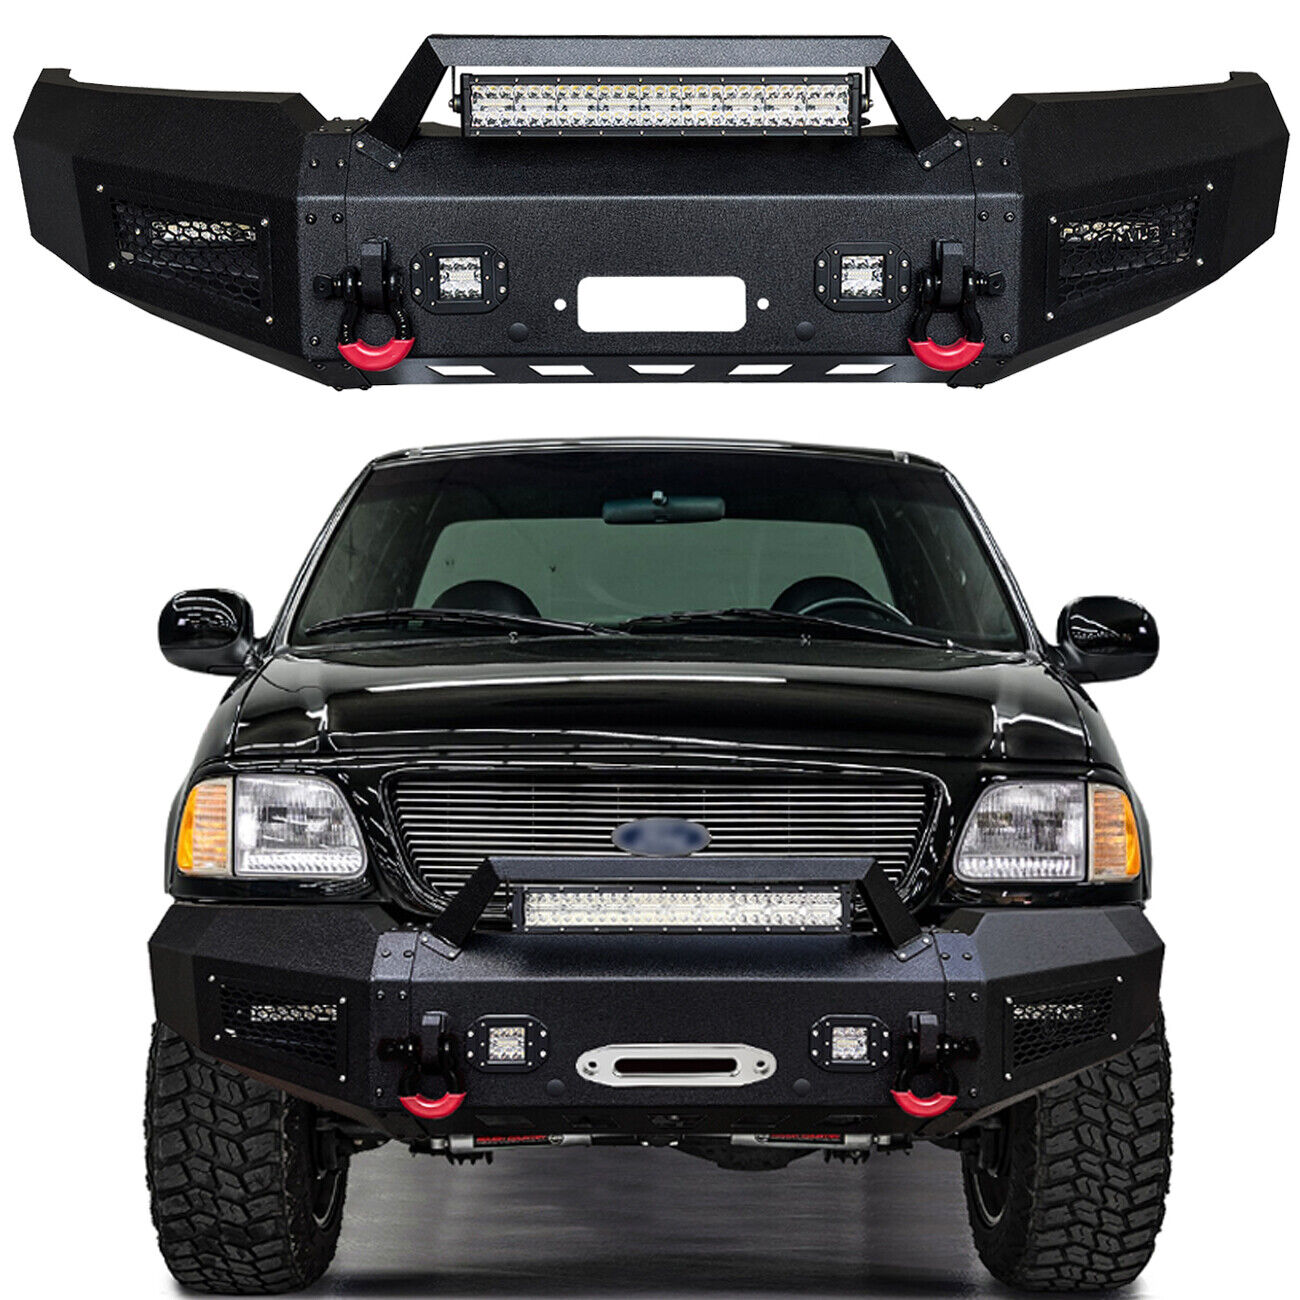 Vijay Fits 1997-2003 Ford F150 Front or Rear Bumper With LED Light and D-Rings